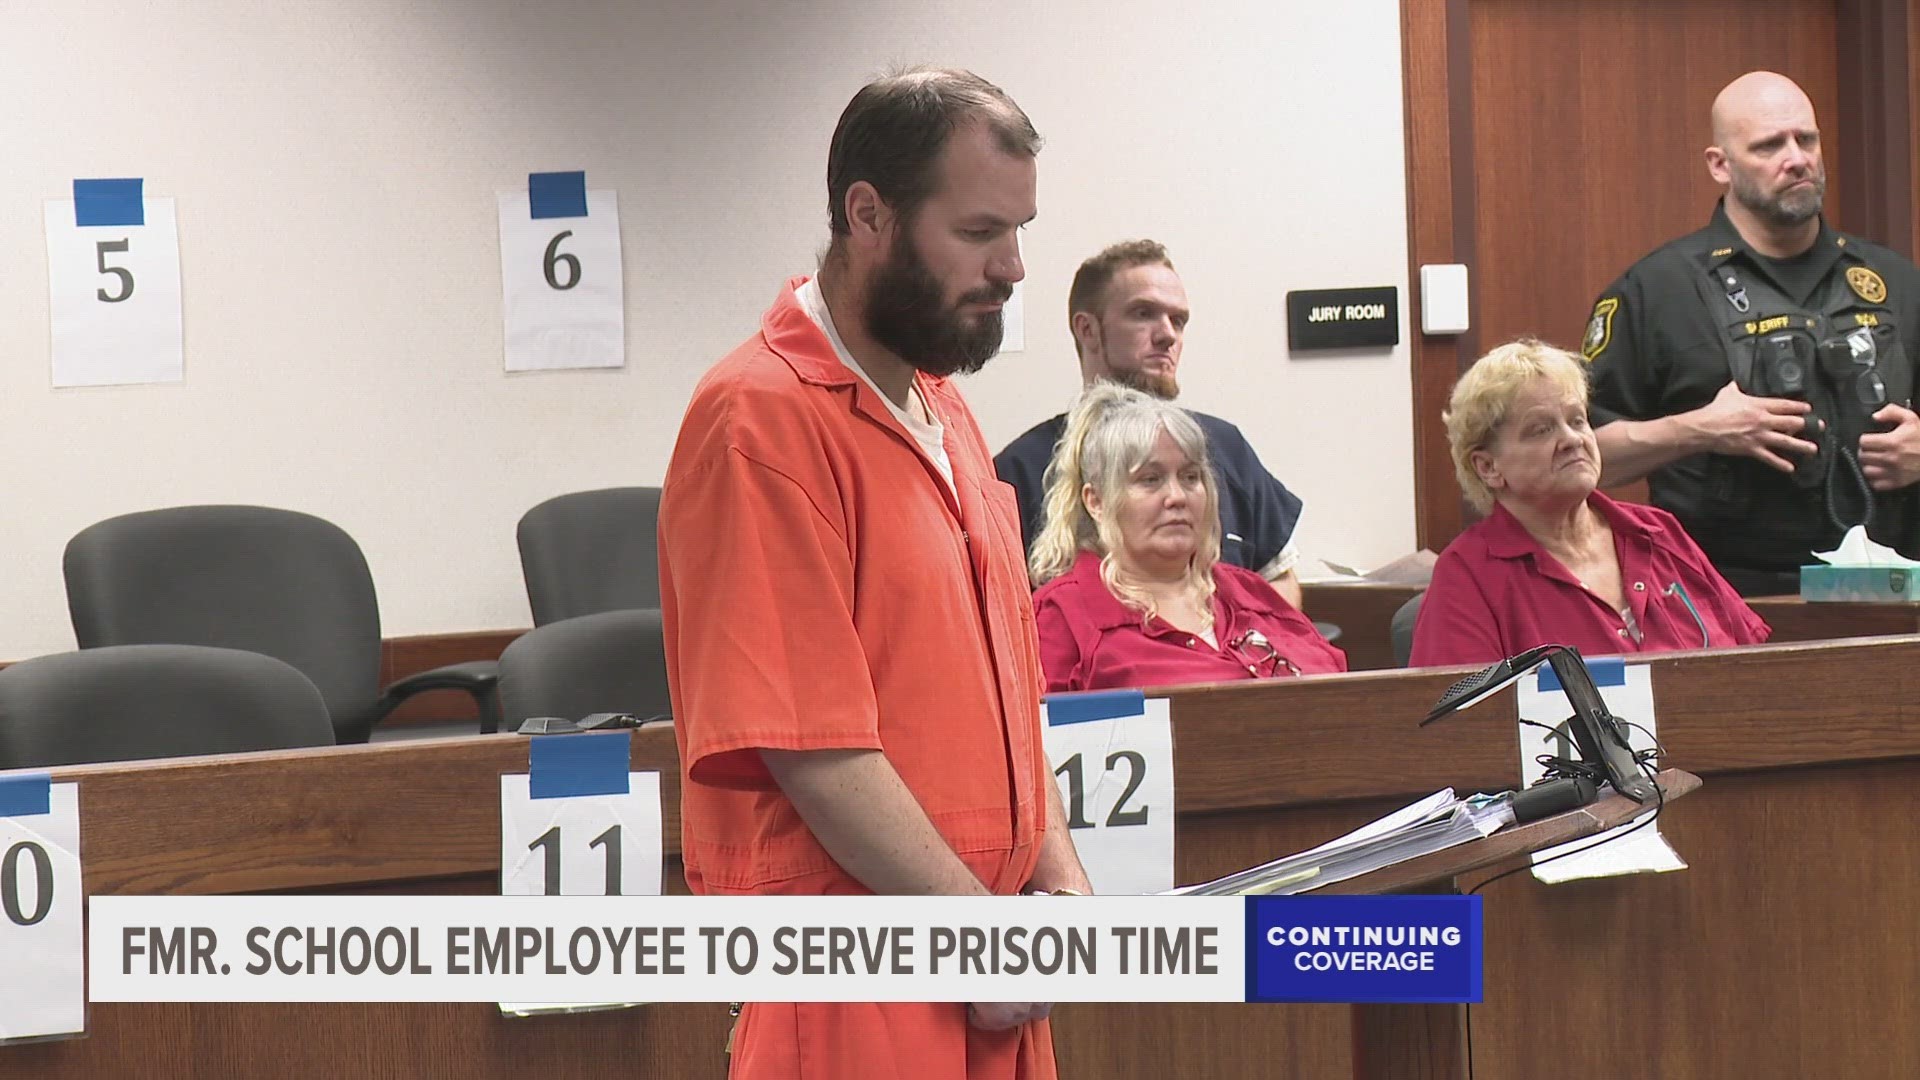 Scott Simmons was sentenced to serve between 85 months and 15 years in prison for his actions. He will get credit for 43 days already served in jail.